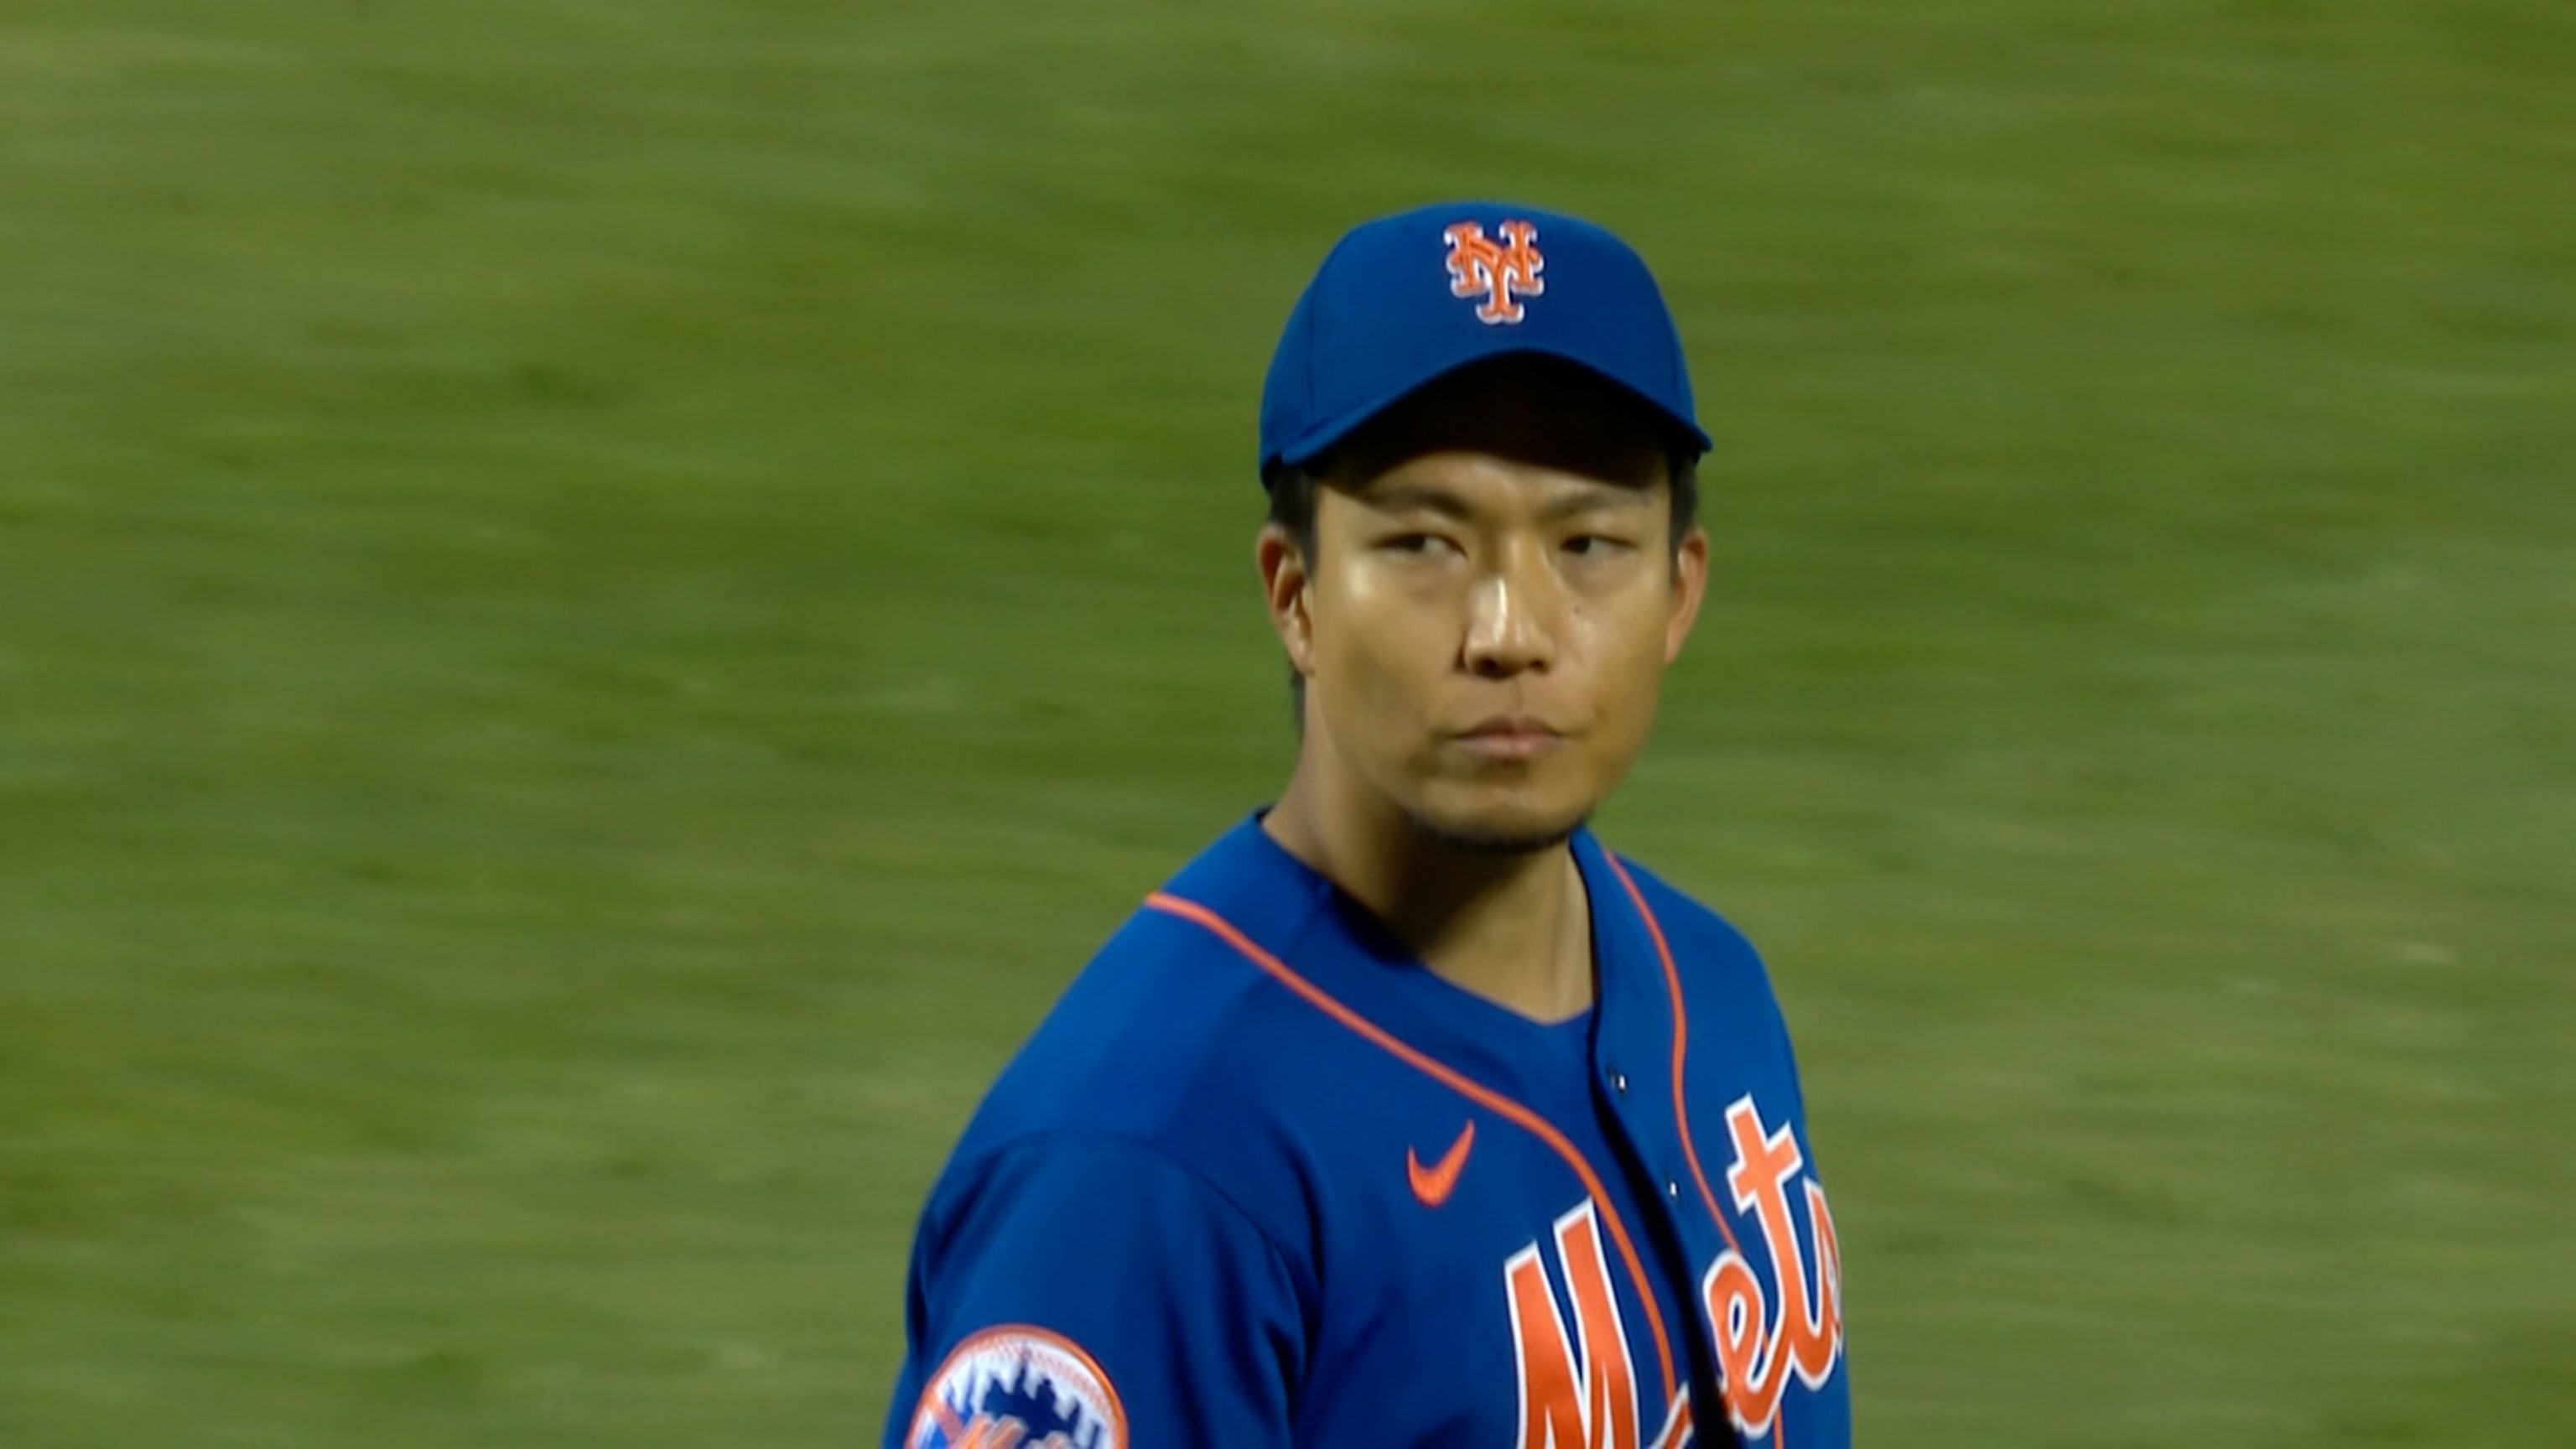 Kodai Senga sets Mets single-game record for most strikeouts by